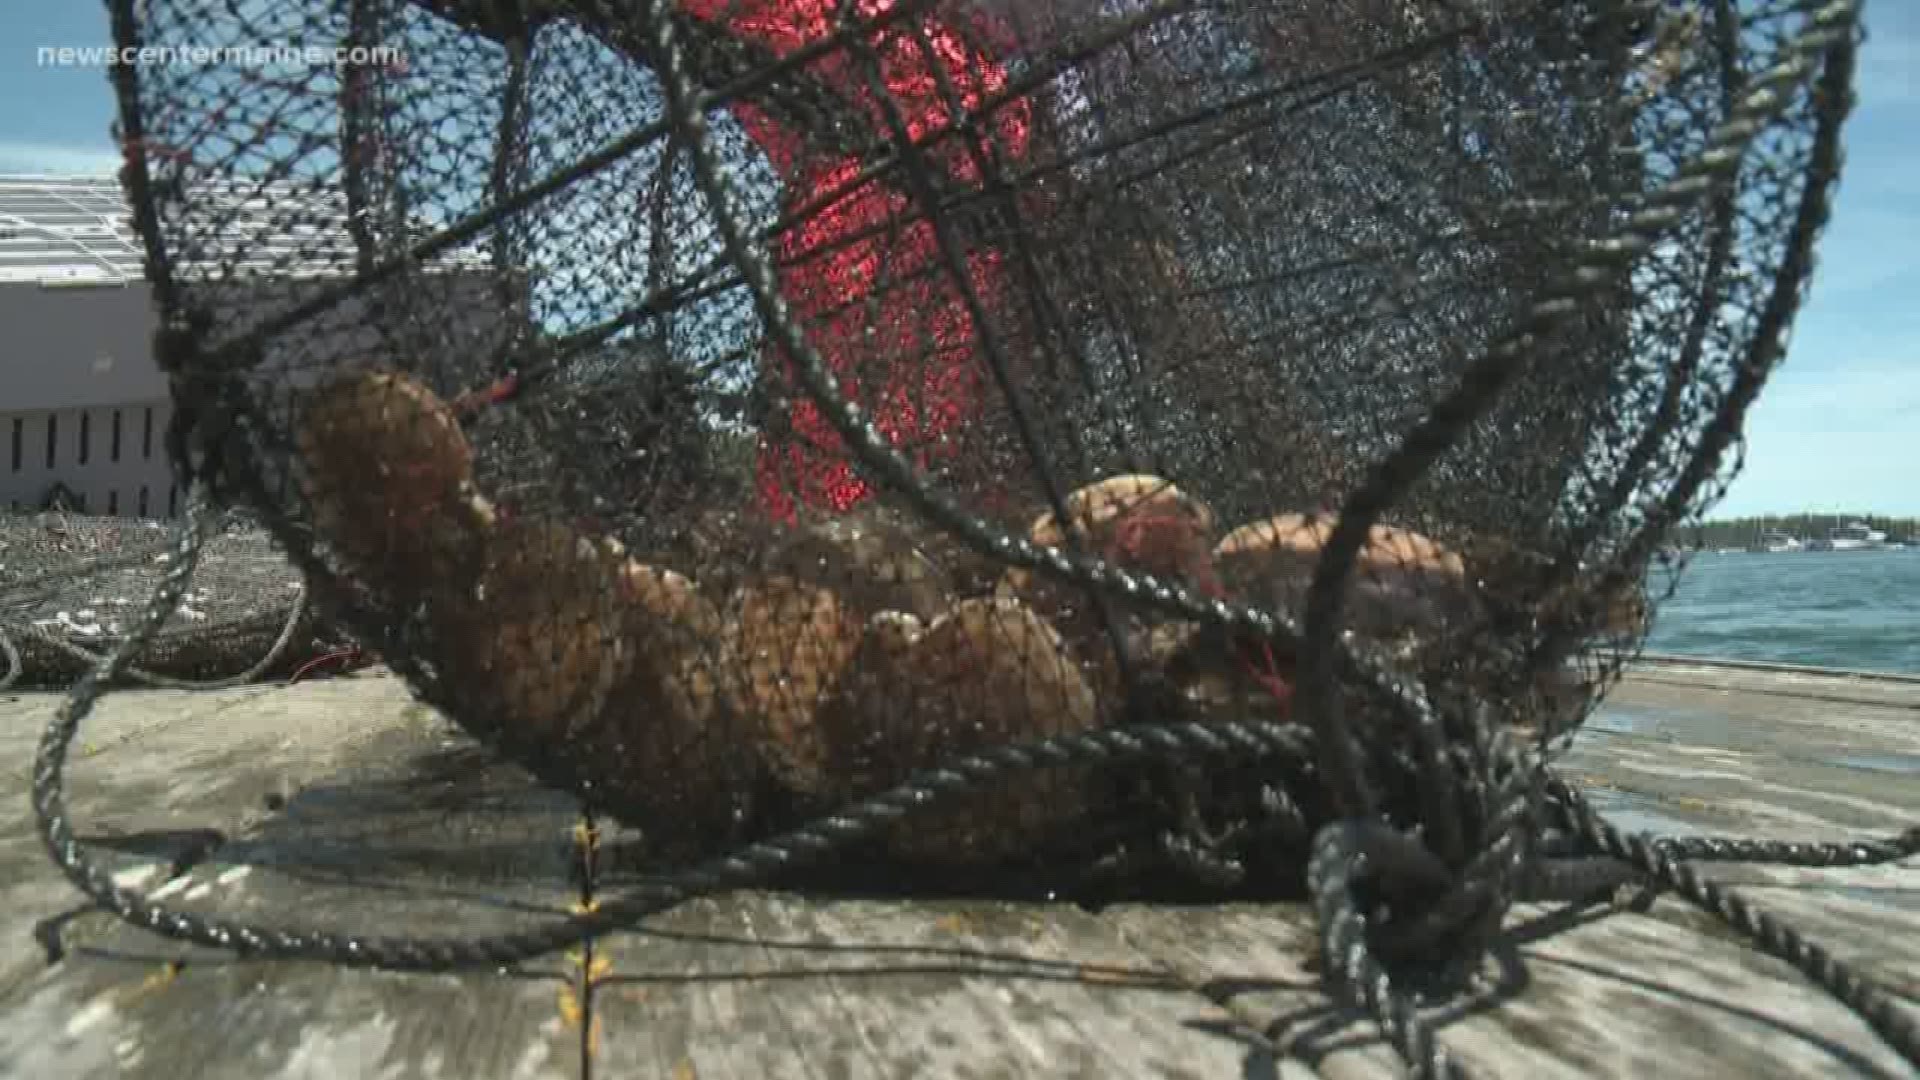 Scallop farming is helping to feed a high demand in Maine and bring in money for fishermen in the state.